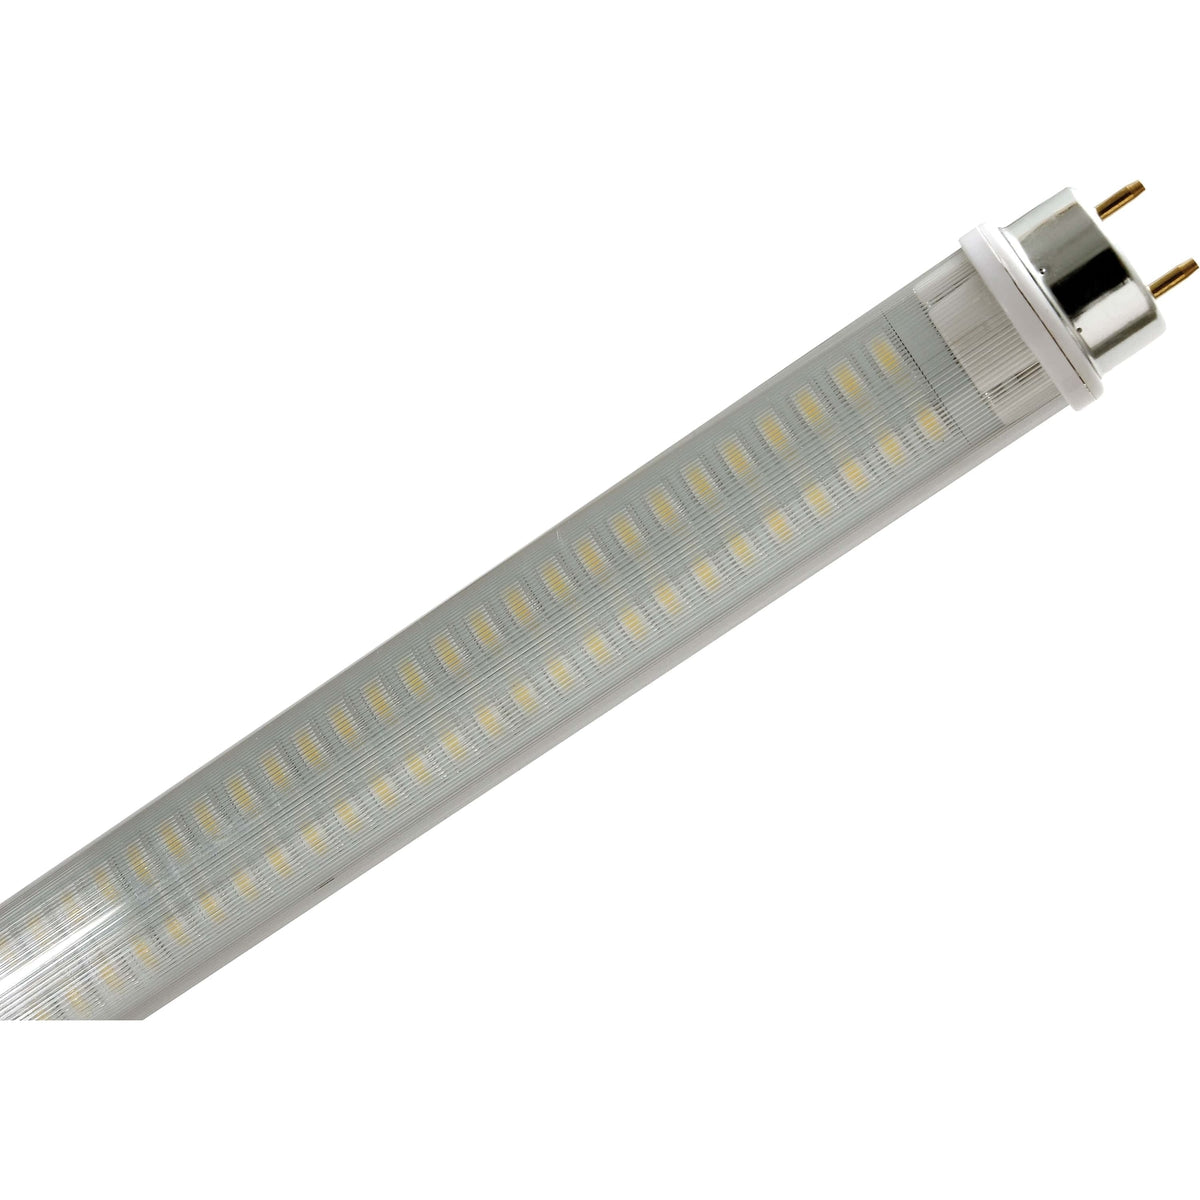 Ming's Mark Qualifies for Free Shipping Ming's Mark LongLife 12v LED 18" Tube with T8 500 LM Natural White #3528101